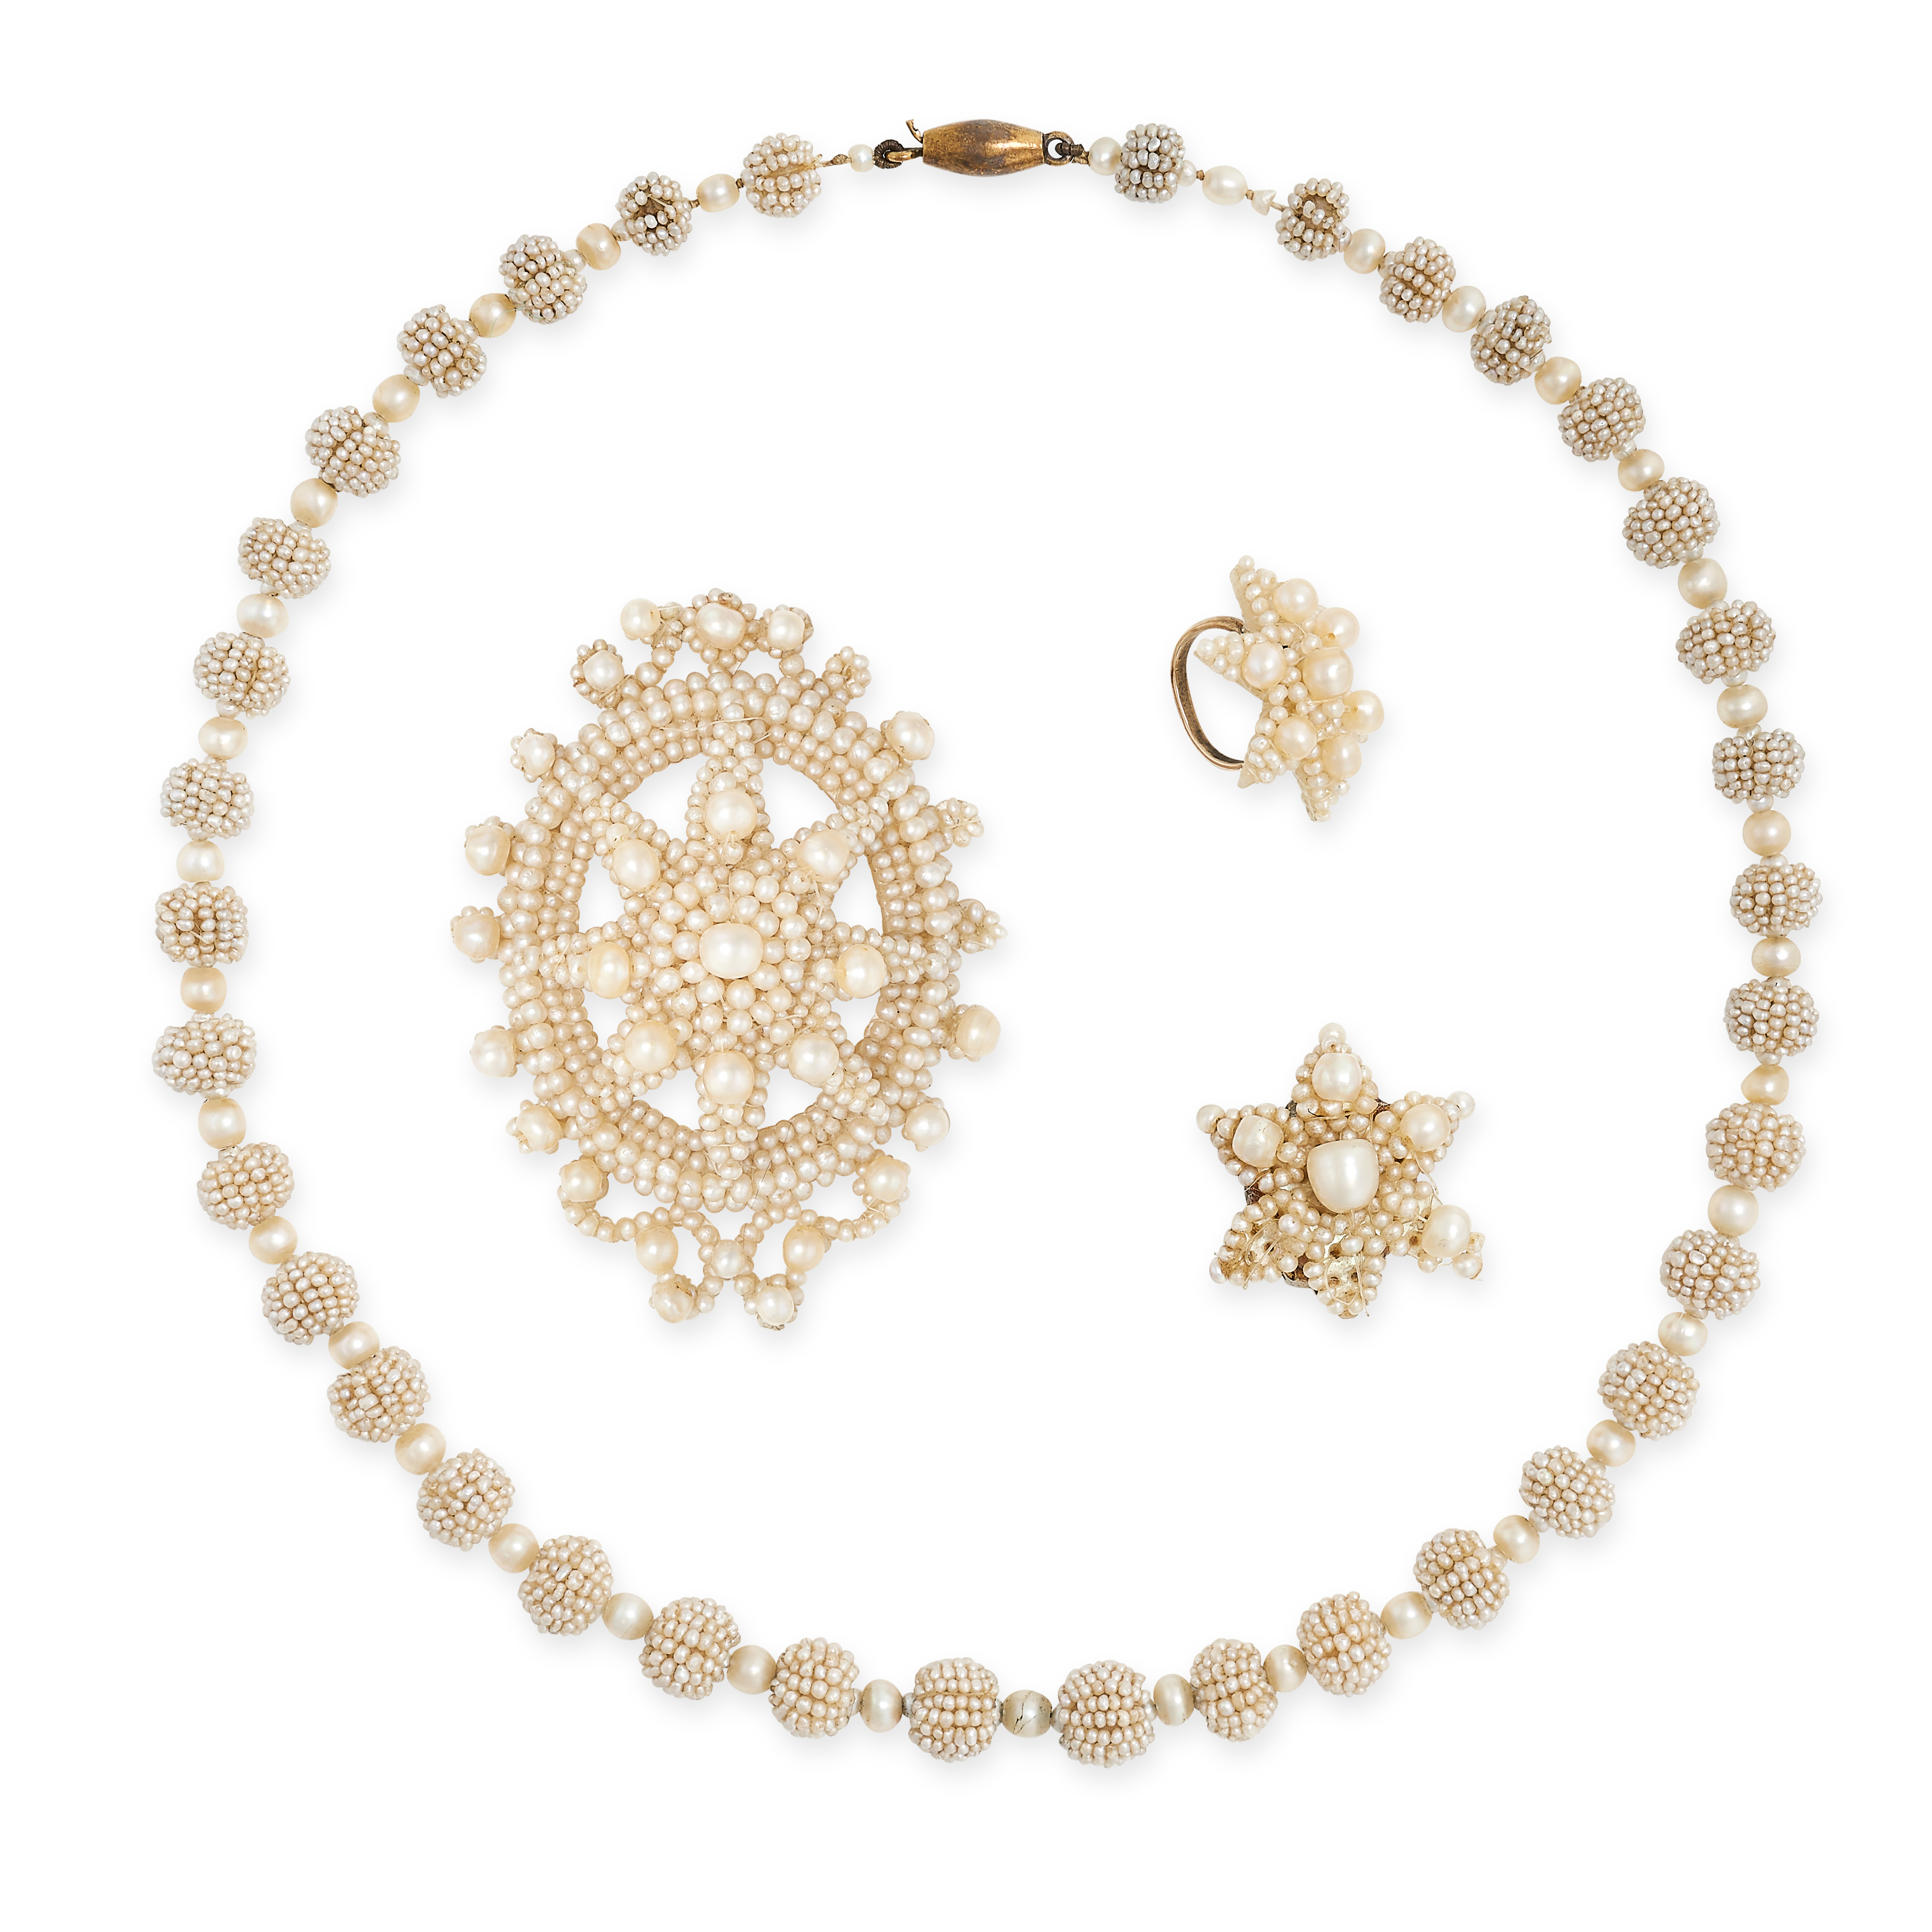 NO RESERVE - AN ANTIQUE VICTORIAN SEED PEARL AND PEARL NECKLACE PENDANT SUITE the demi parure